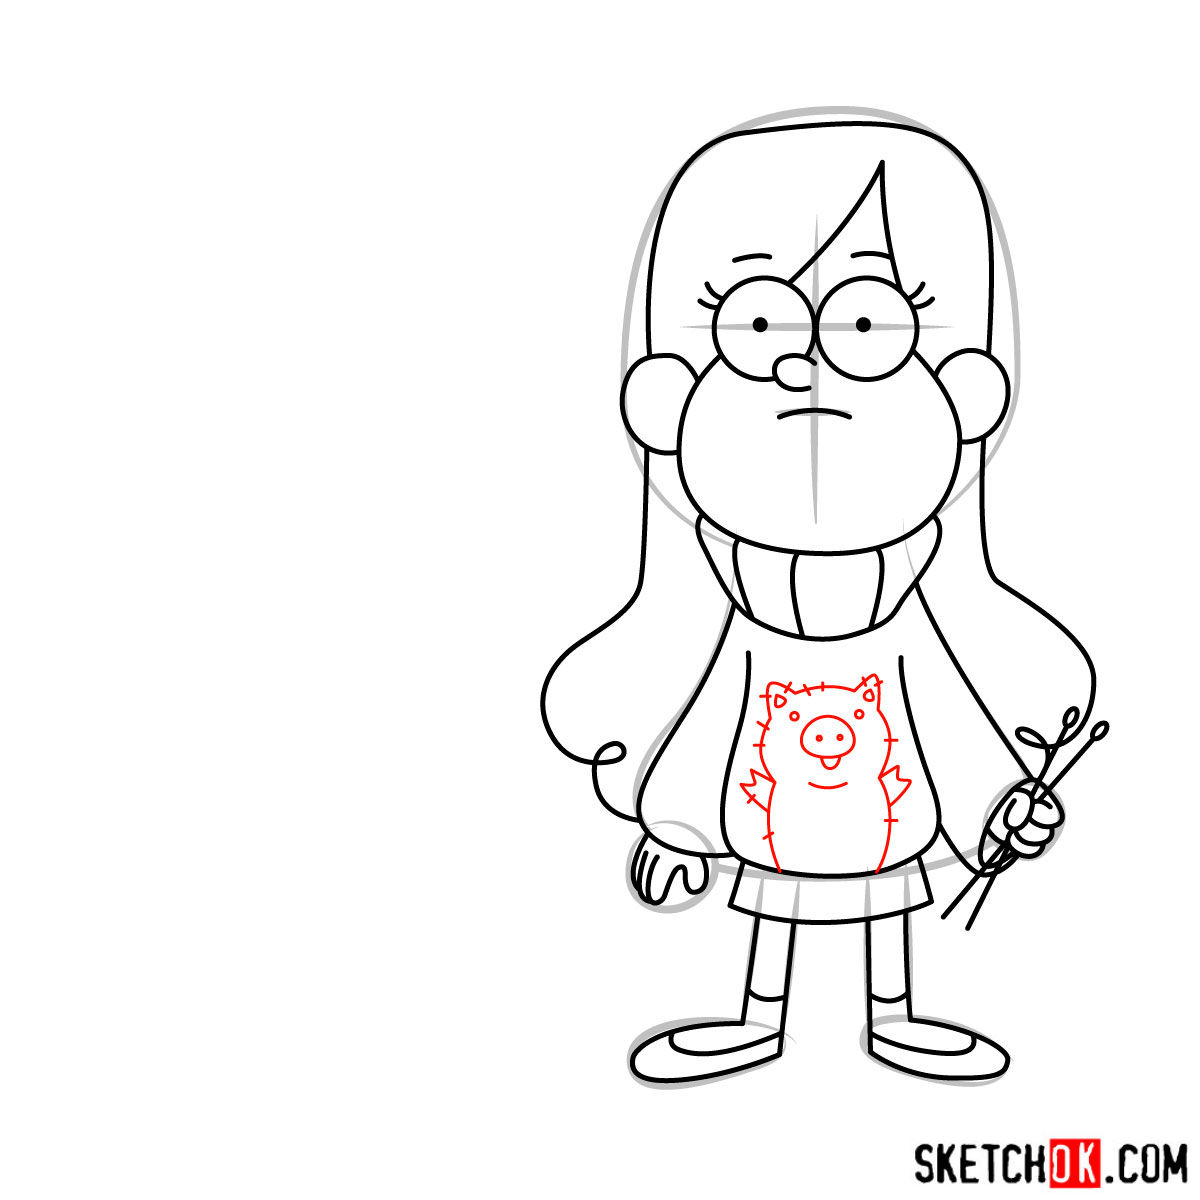 How to draw Mabel Pines with Pig - step 10